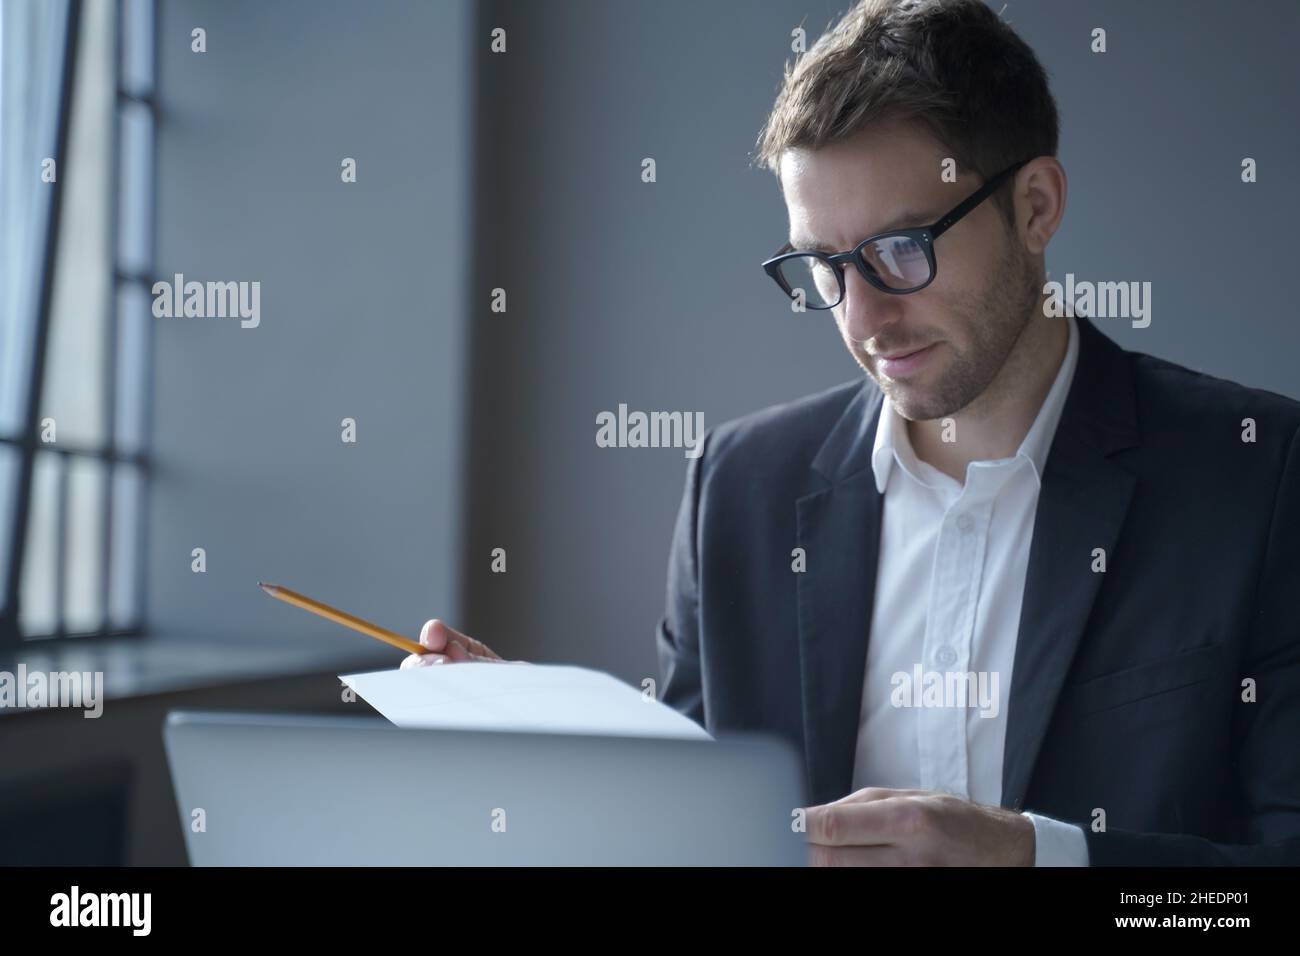 Serious male professional analyzing documents at workplace. Business and job concept Stock Photo